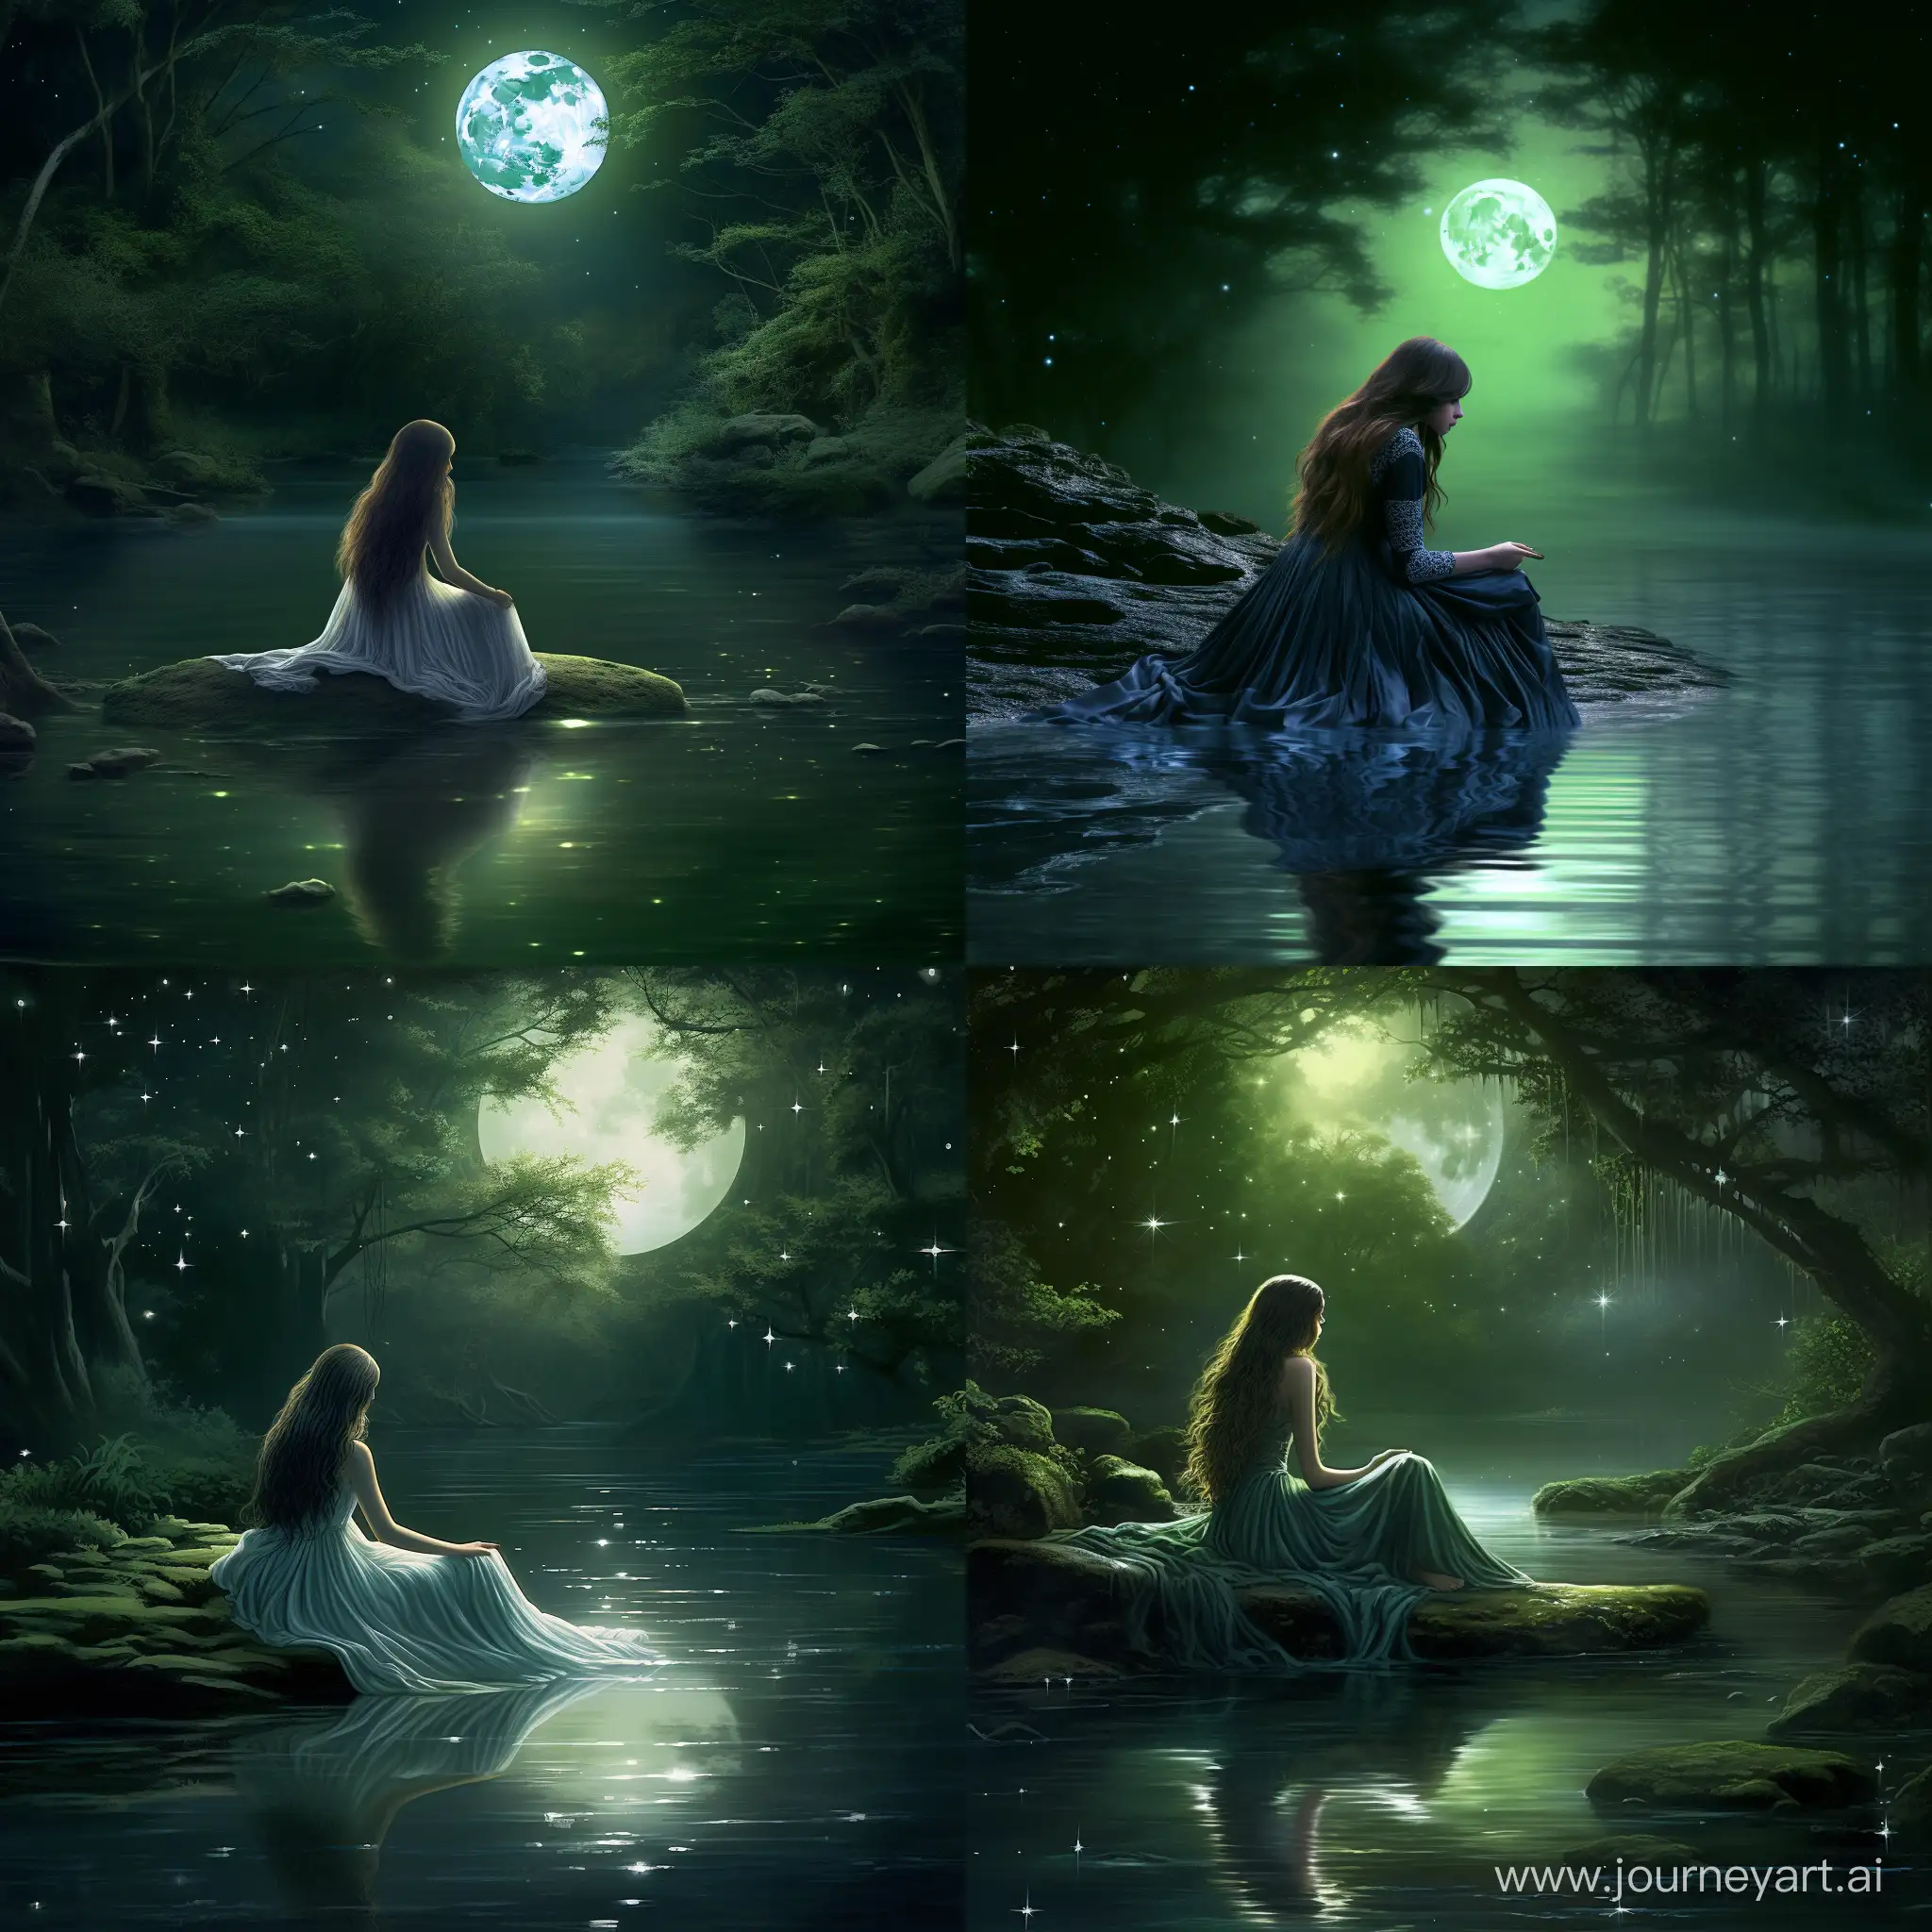 Enchanting-Moonlit-Scene-with-Graceful-Woman-by-the-Babbling-Stream